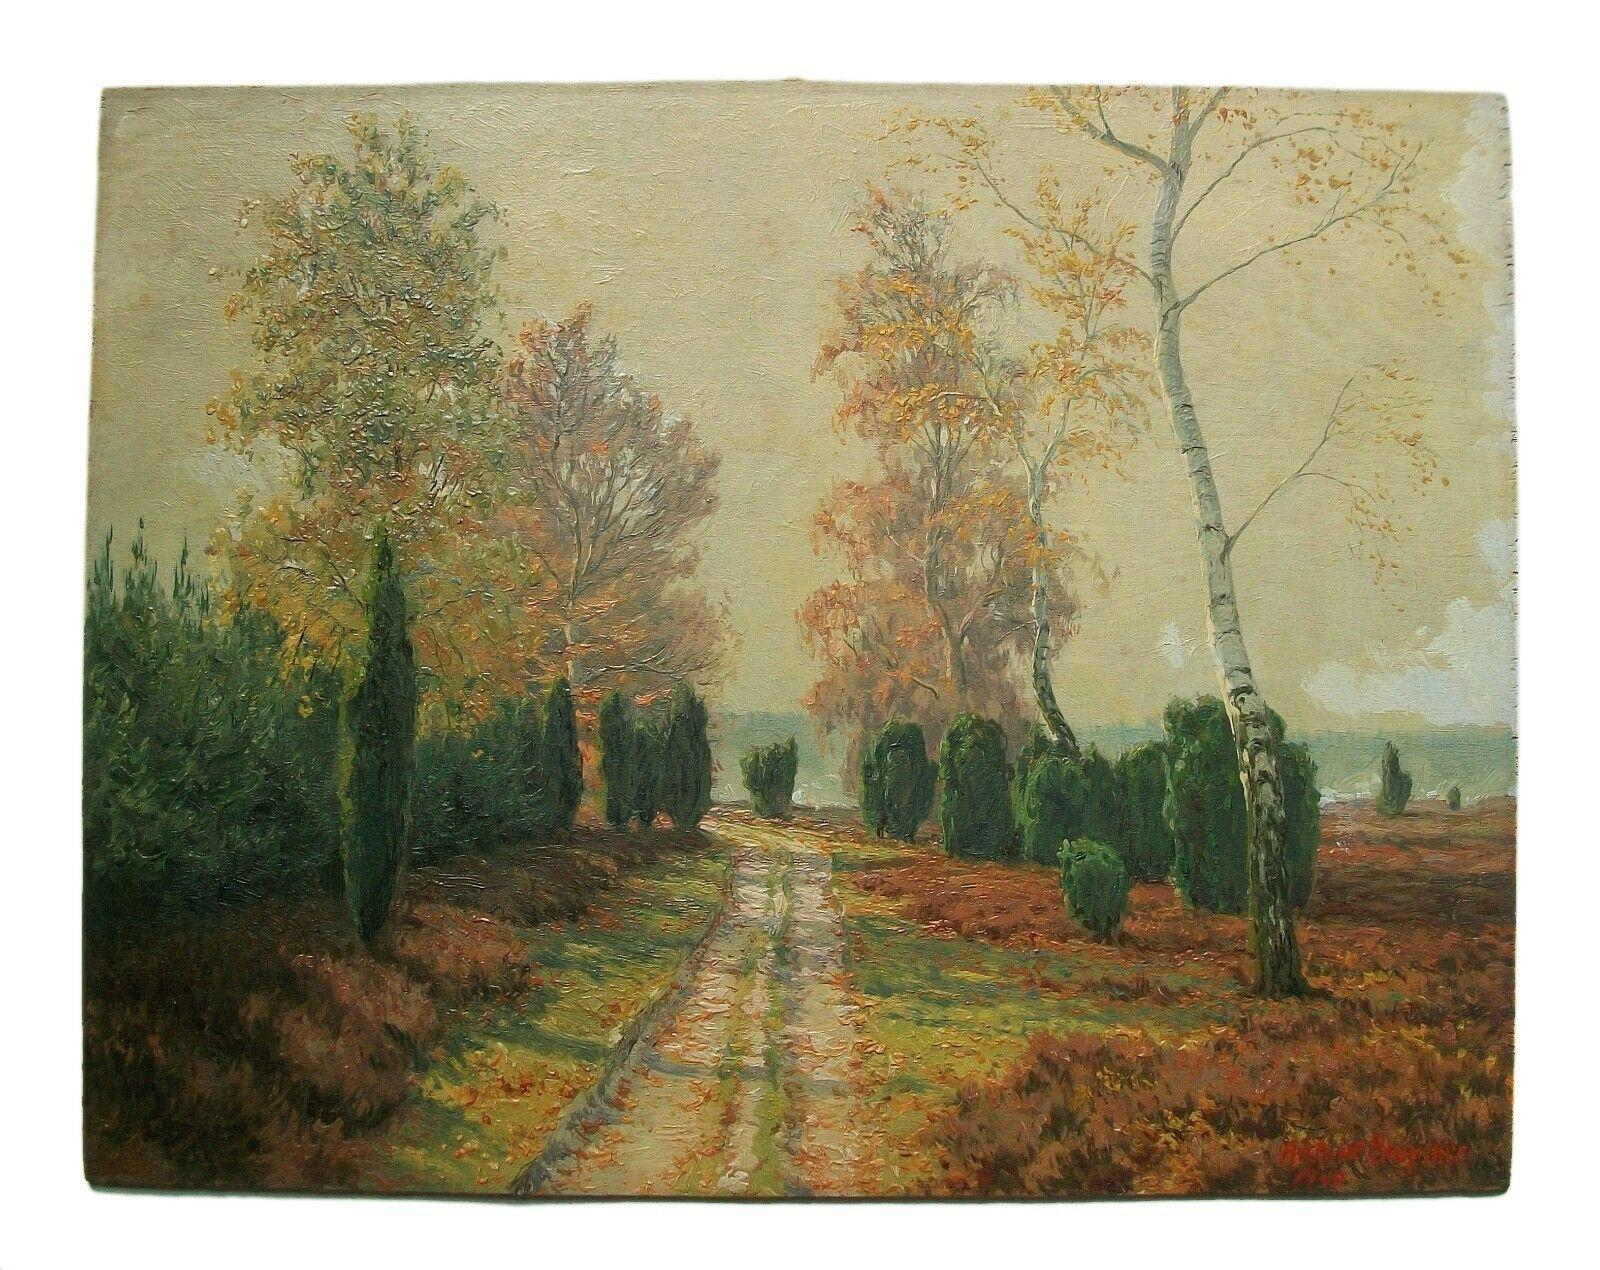 Romantic Richard De Bruycker, 'Autumn Morning', Oil Painting on Panel, Germany, 1948 For Sale